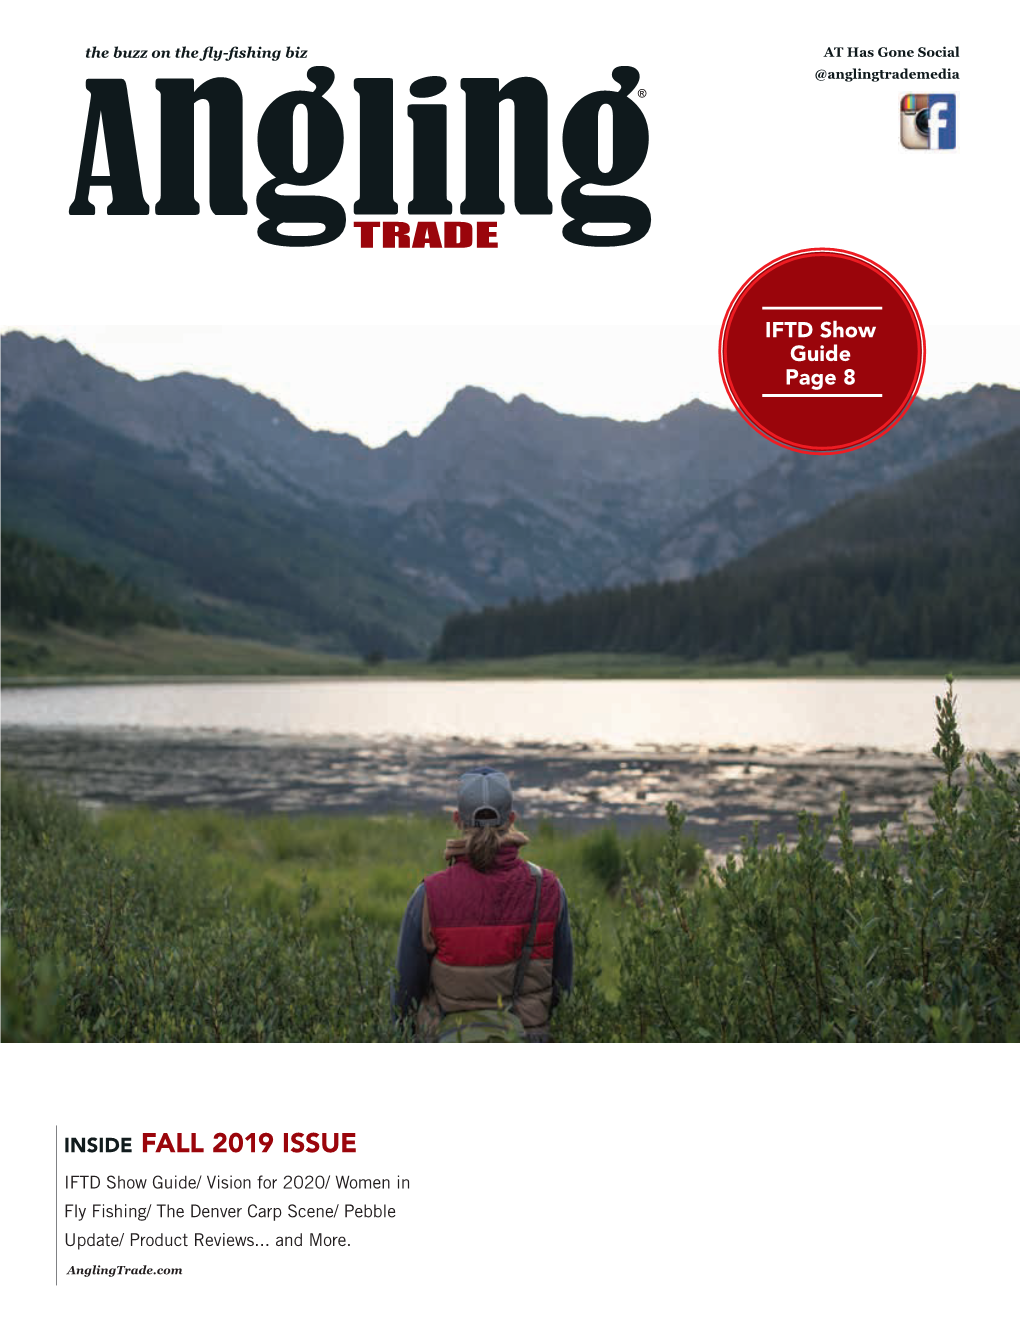 INSIDE FALL 2019 ISSUE IFTD Show Guide/ Vision for 2020/ Women in Fly Fishing/ the Denver Carp Scene/ Pebble Update/ Product Reviews